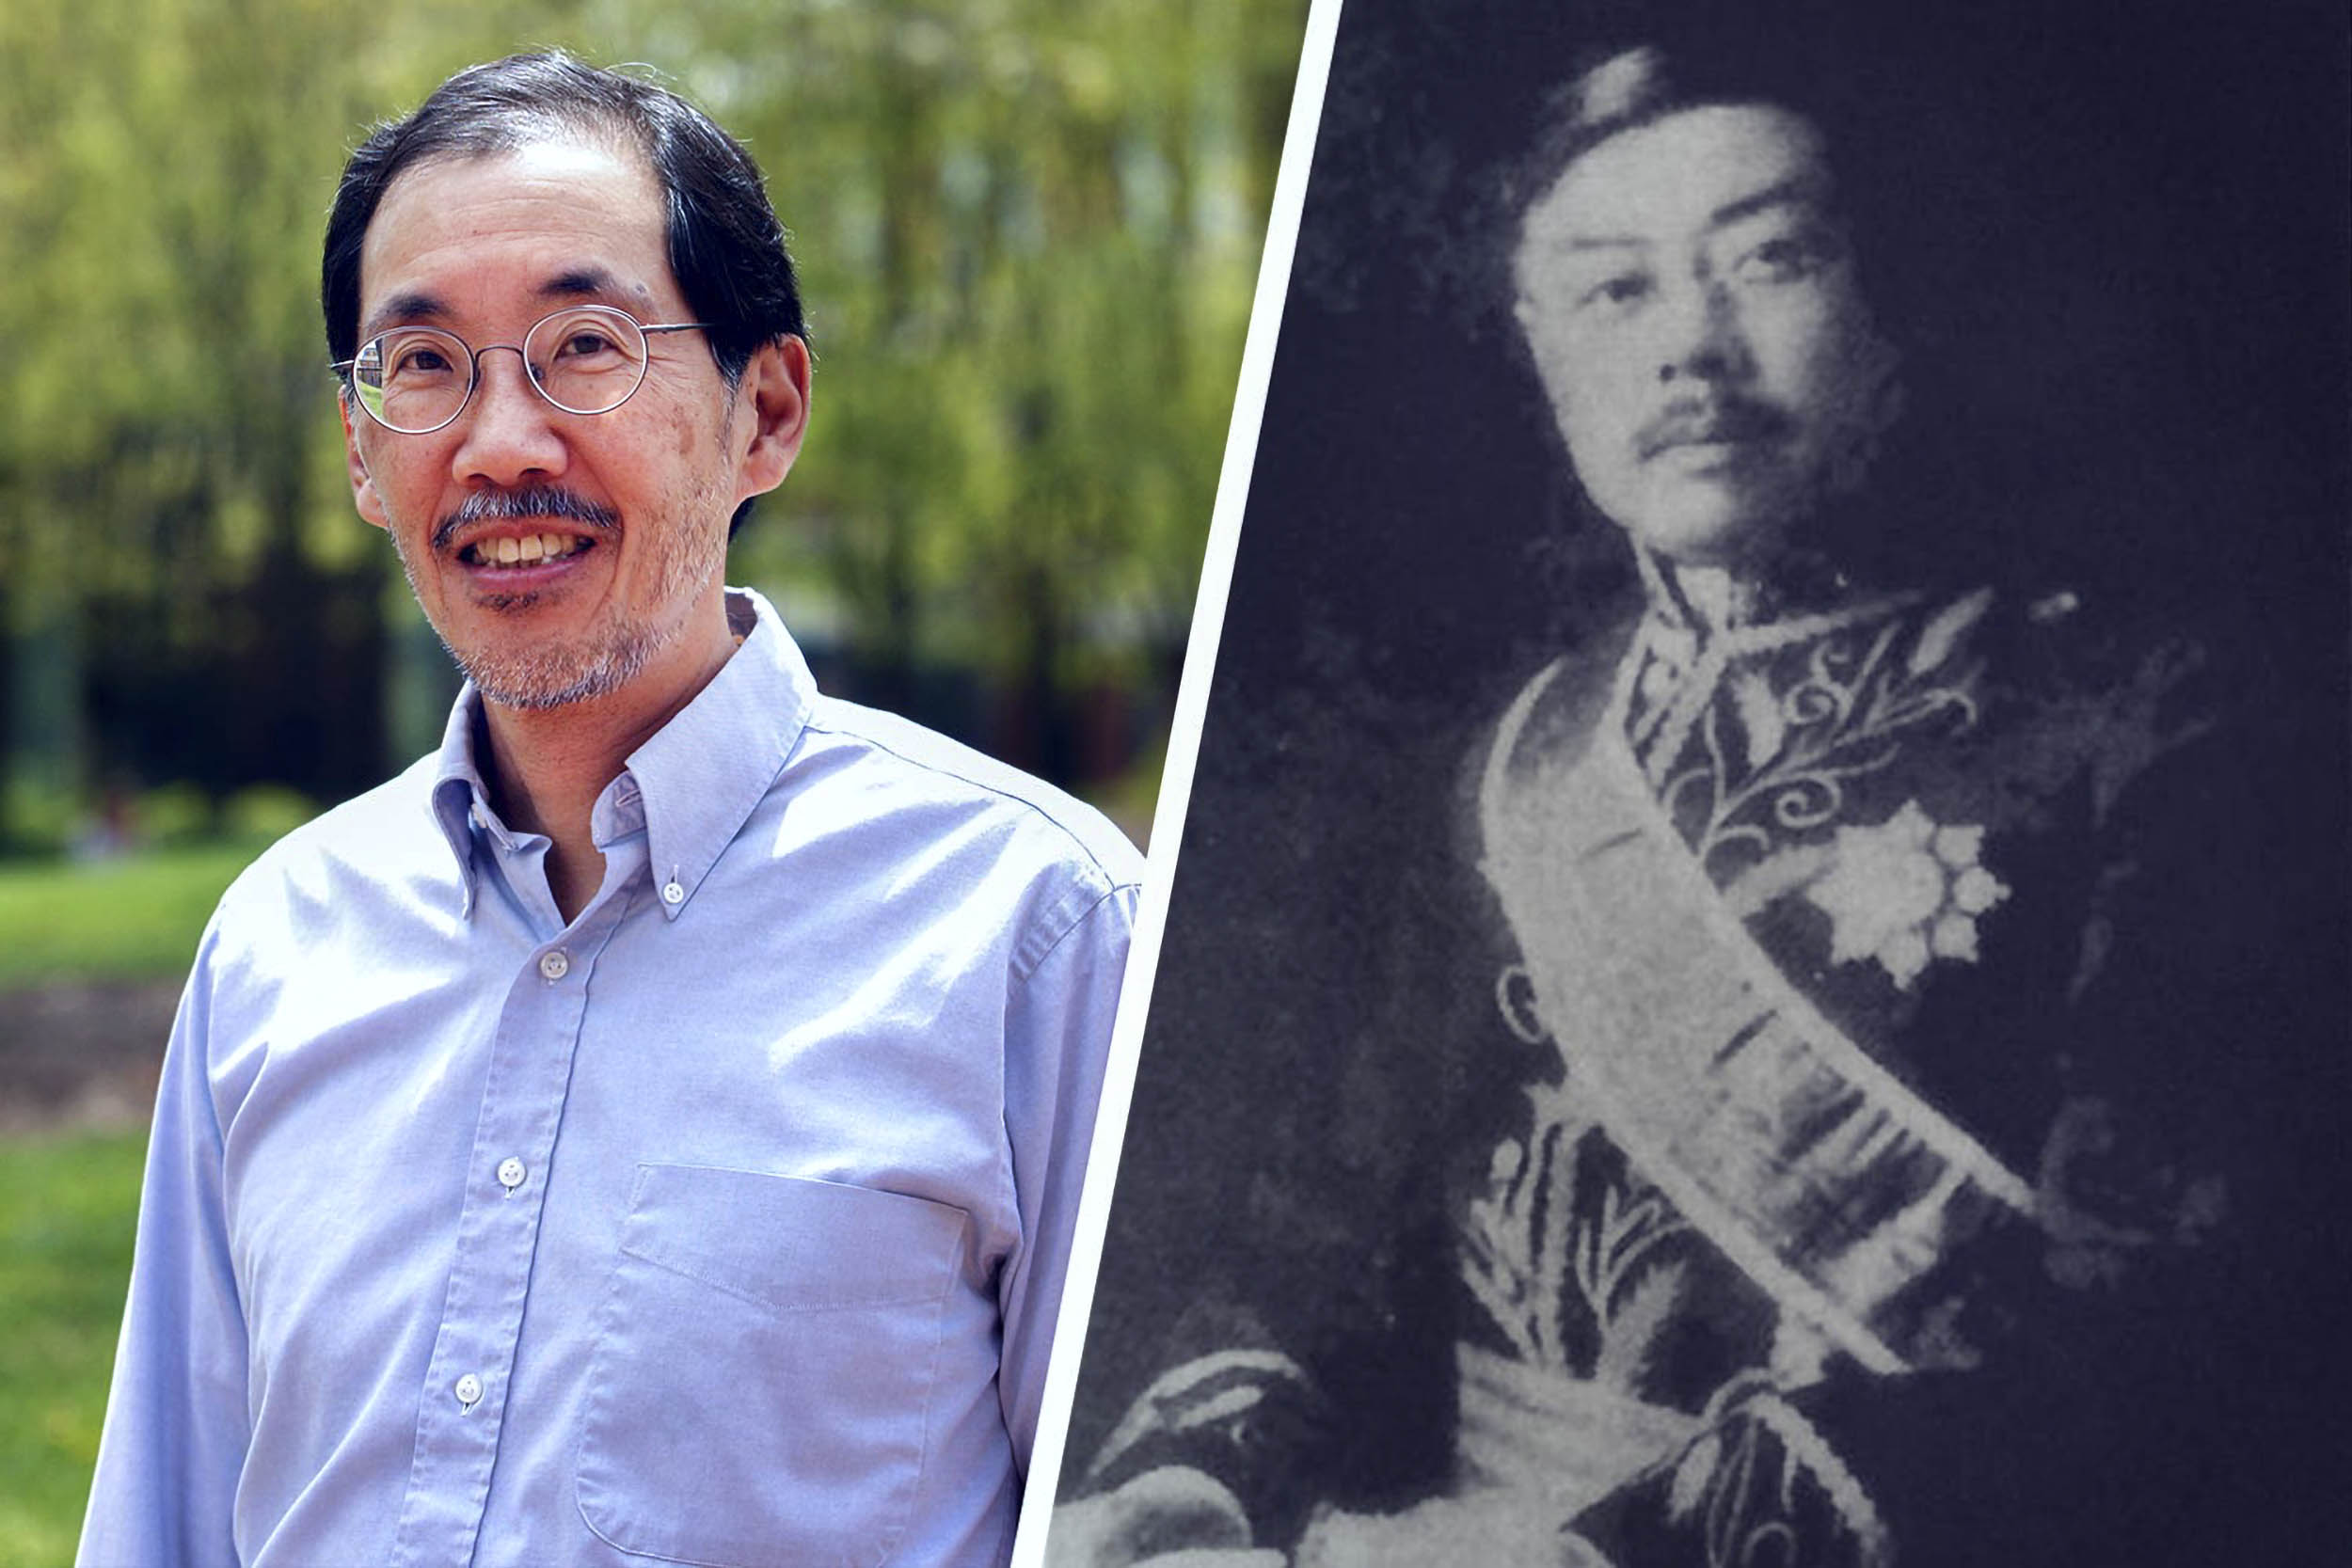 Headshots of two men.  Left: dressed in a dress shirt, right: dressed in Asian military uniform